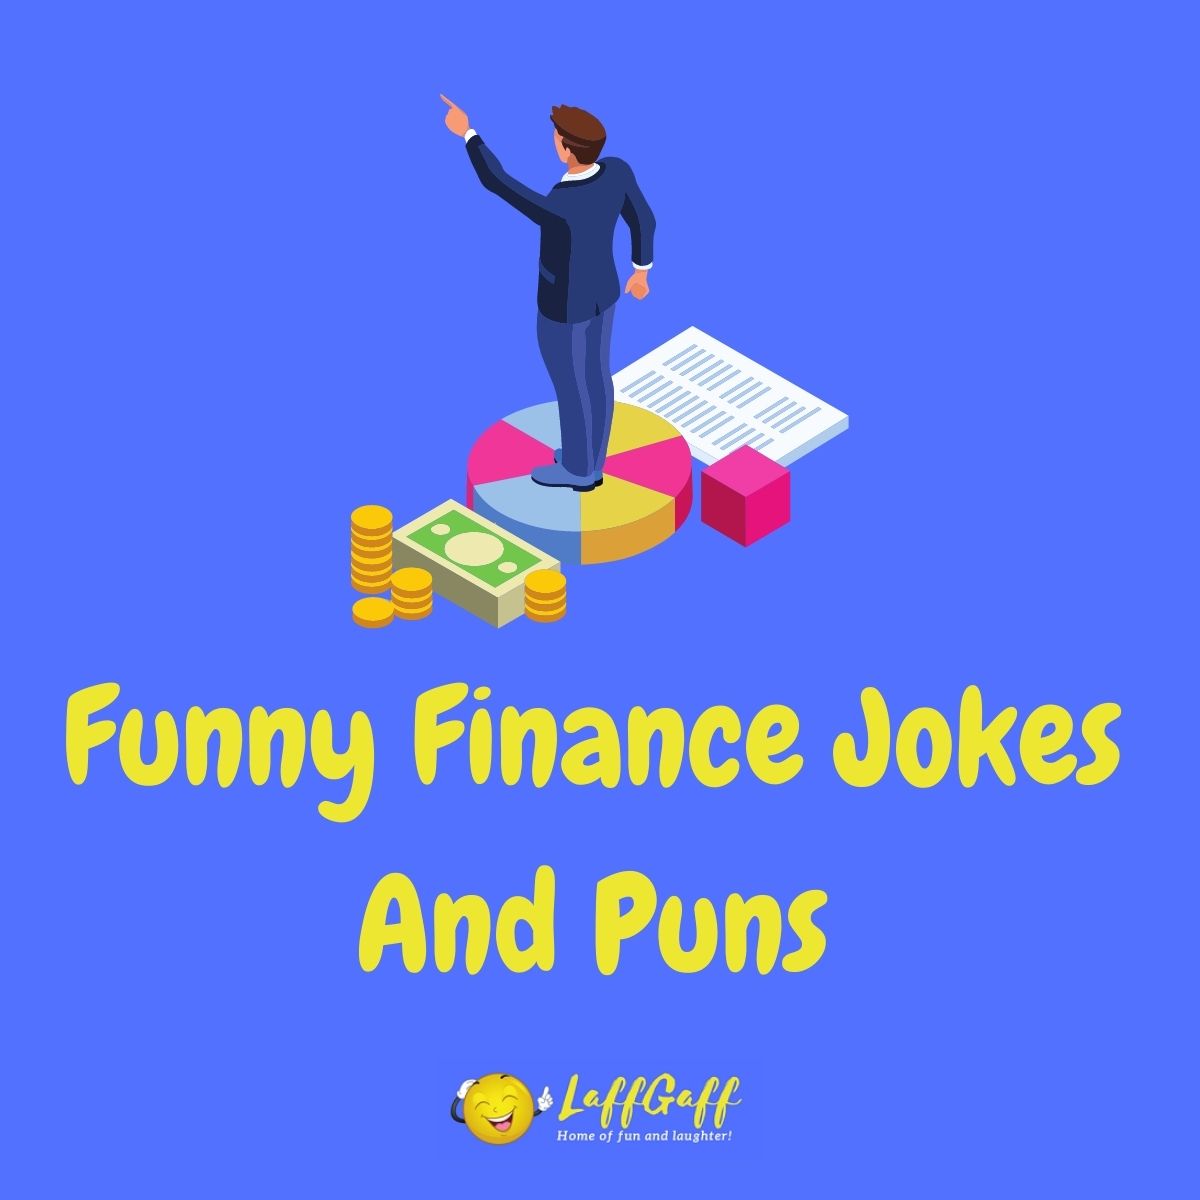 Featured image for a page of funny finance jokes and puns.